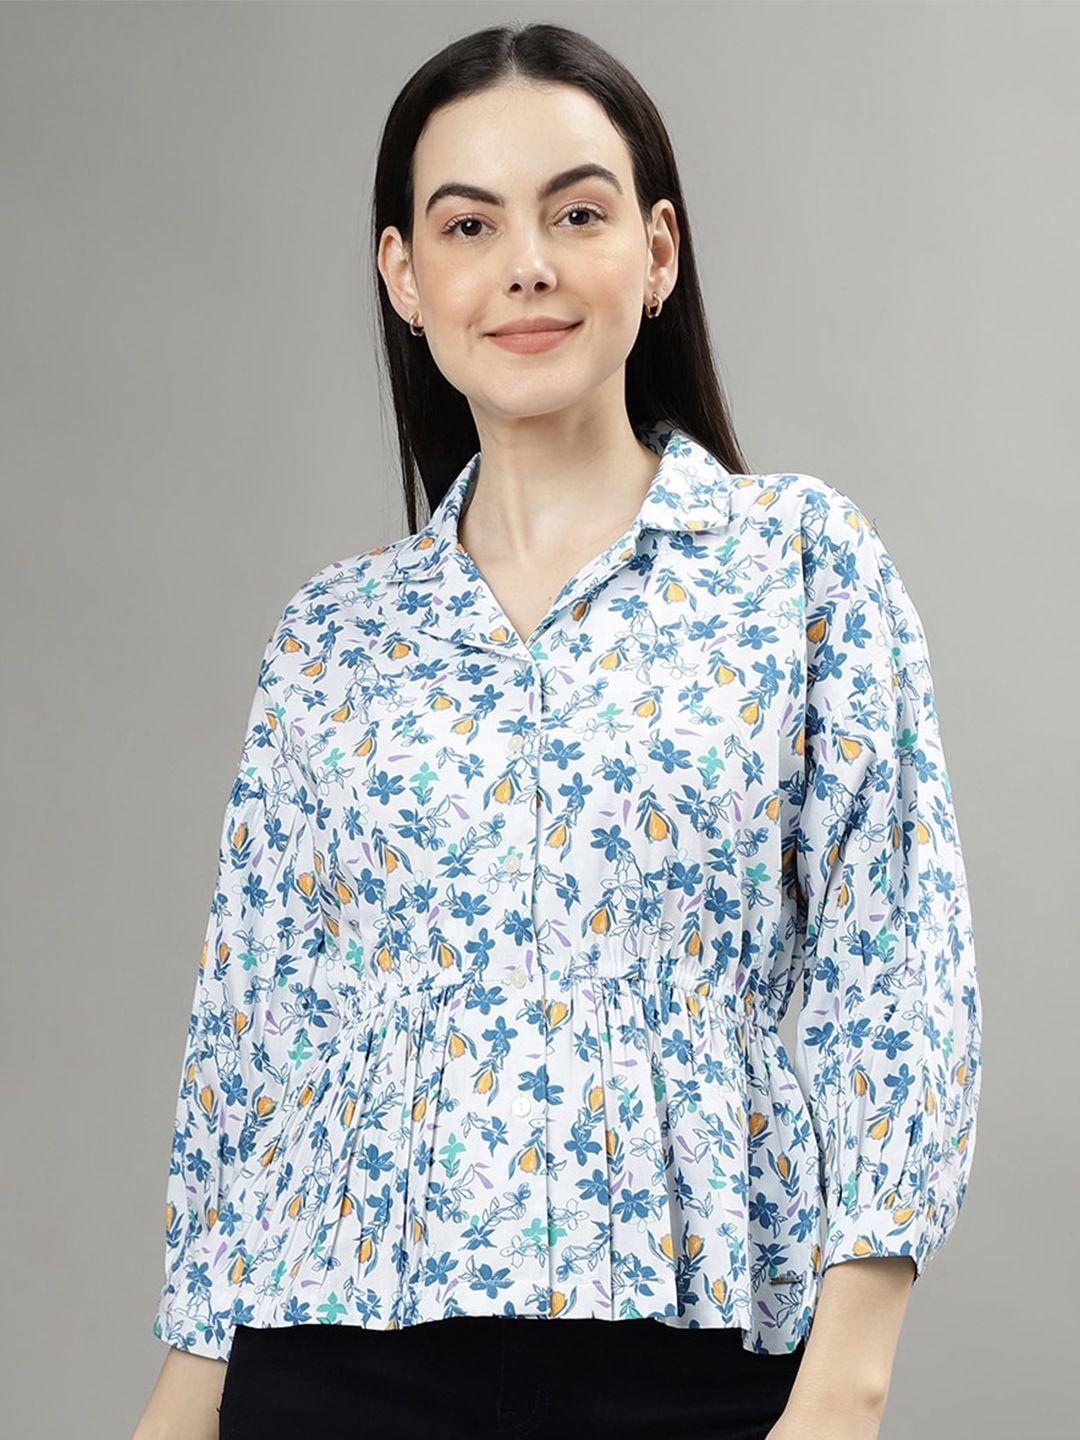 elle floral printed spread collar three quarter sleeves pleated casual shirt